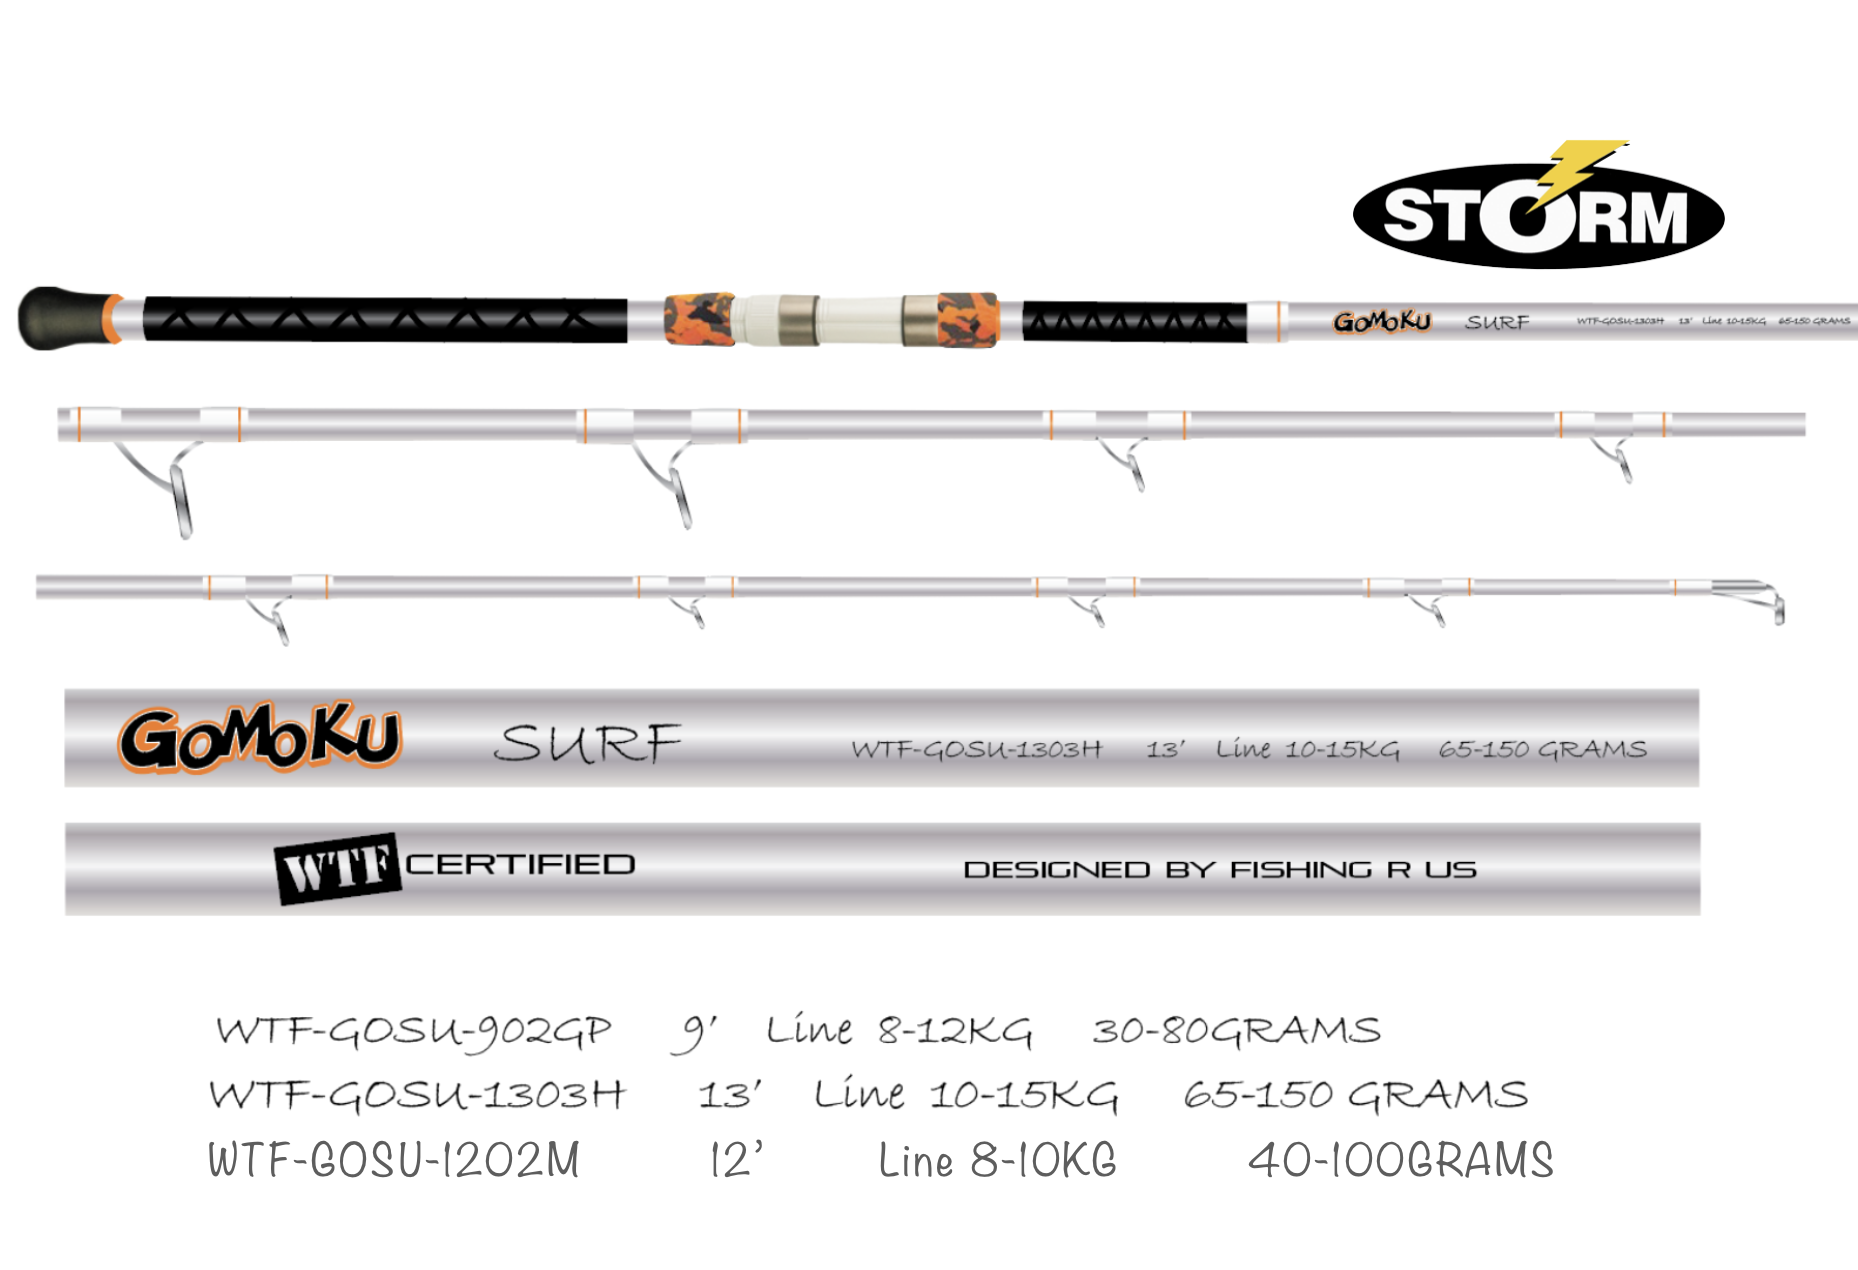 NEW STORM GOMOKU SURF RODS DESIGNED BY FISHING R US – 3 SIZES